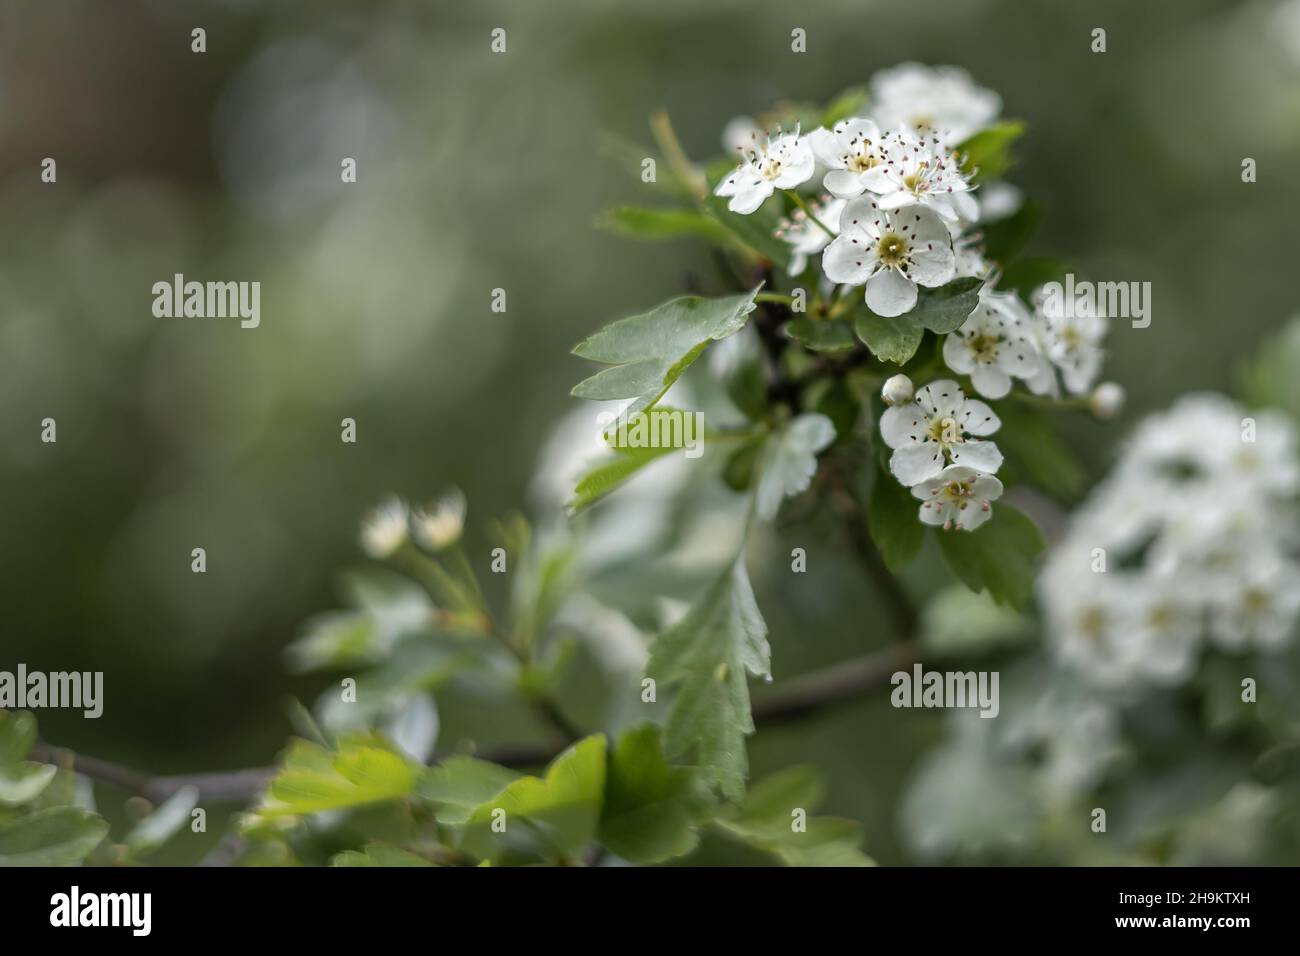 Blooming white hawthorn flowers on a blurred, green background. Stock Photo